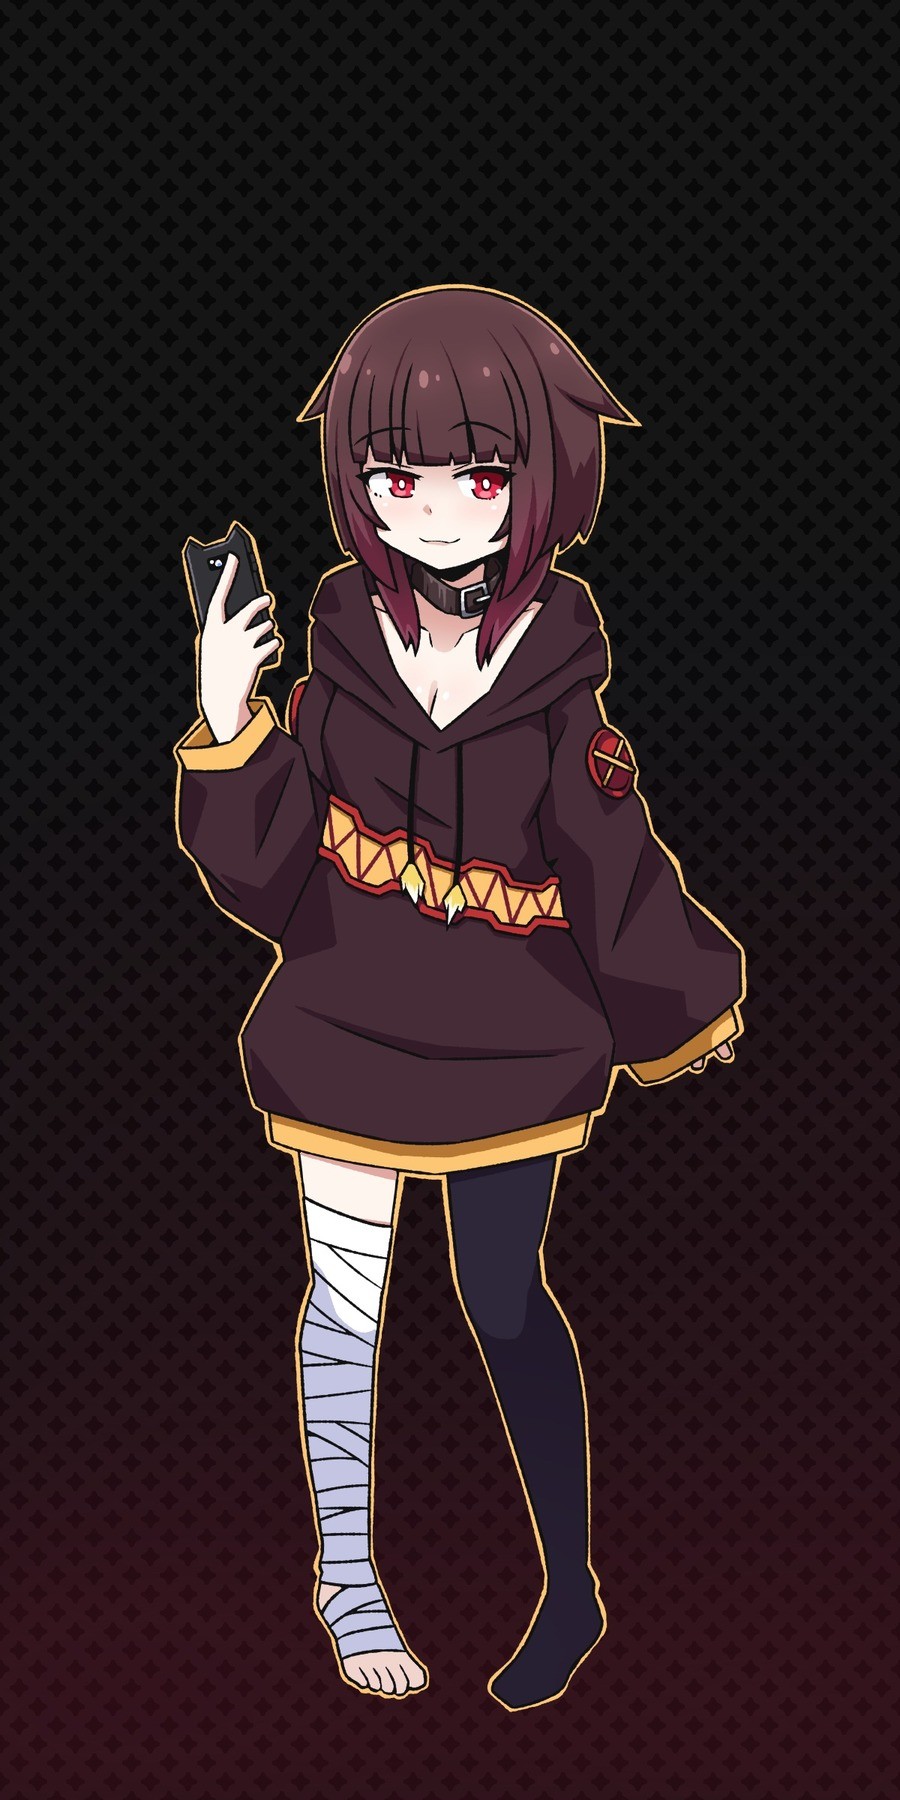 Daily Megu - 858: Meguhoodie. join list: DailySplosion (826 subs)Mention History Source: .. So uh, thanks to your post, I went and found an actual megumin hoodie, but it's not the same one as your post https://fandomaniax-store.com/products/megumin-uni